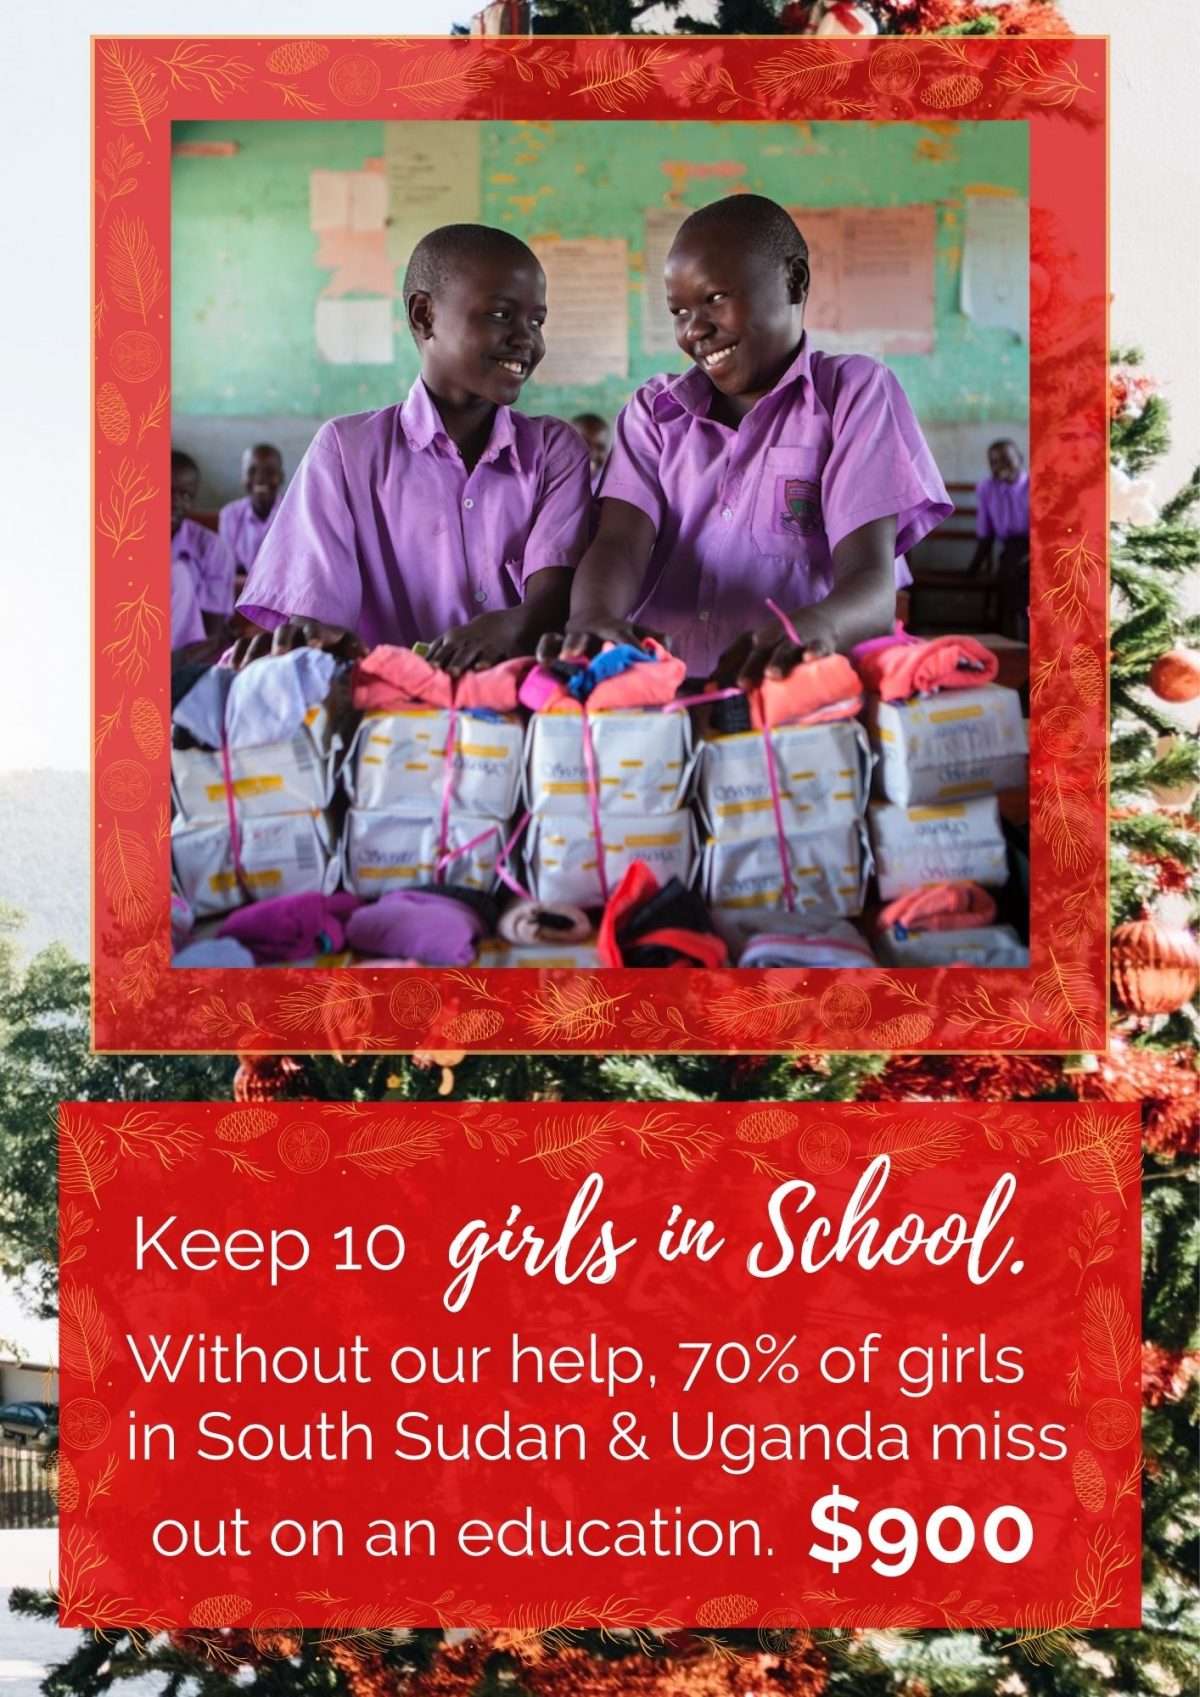 Keep 10 girls in School. Without our help, 70% of girls in South Sudan and Uganda miss out on an education. $900